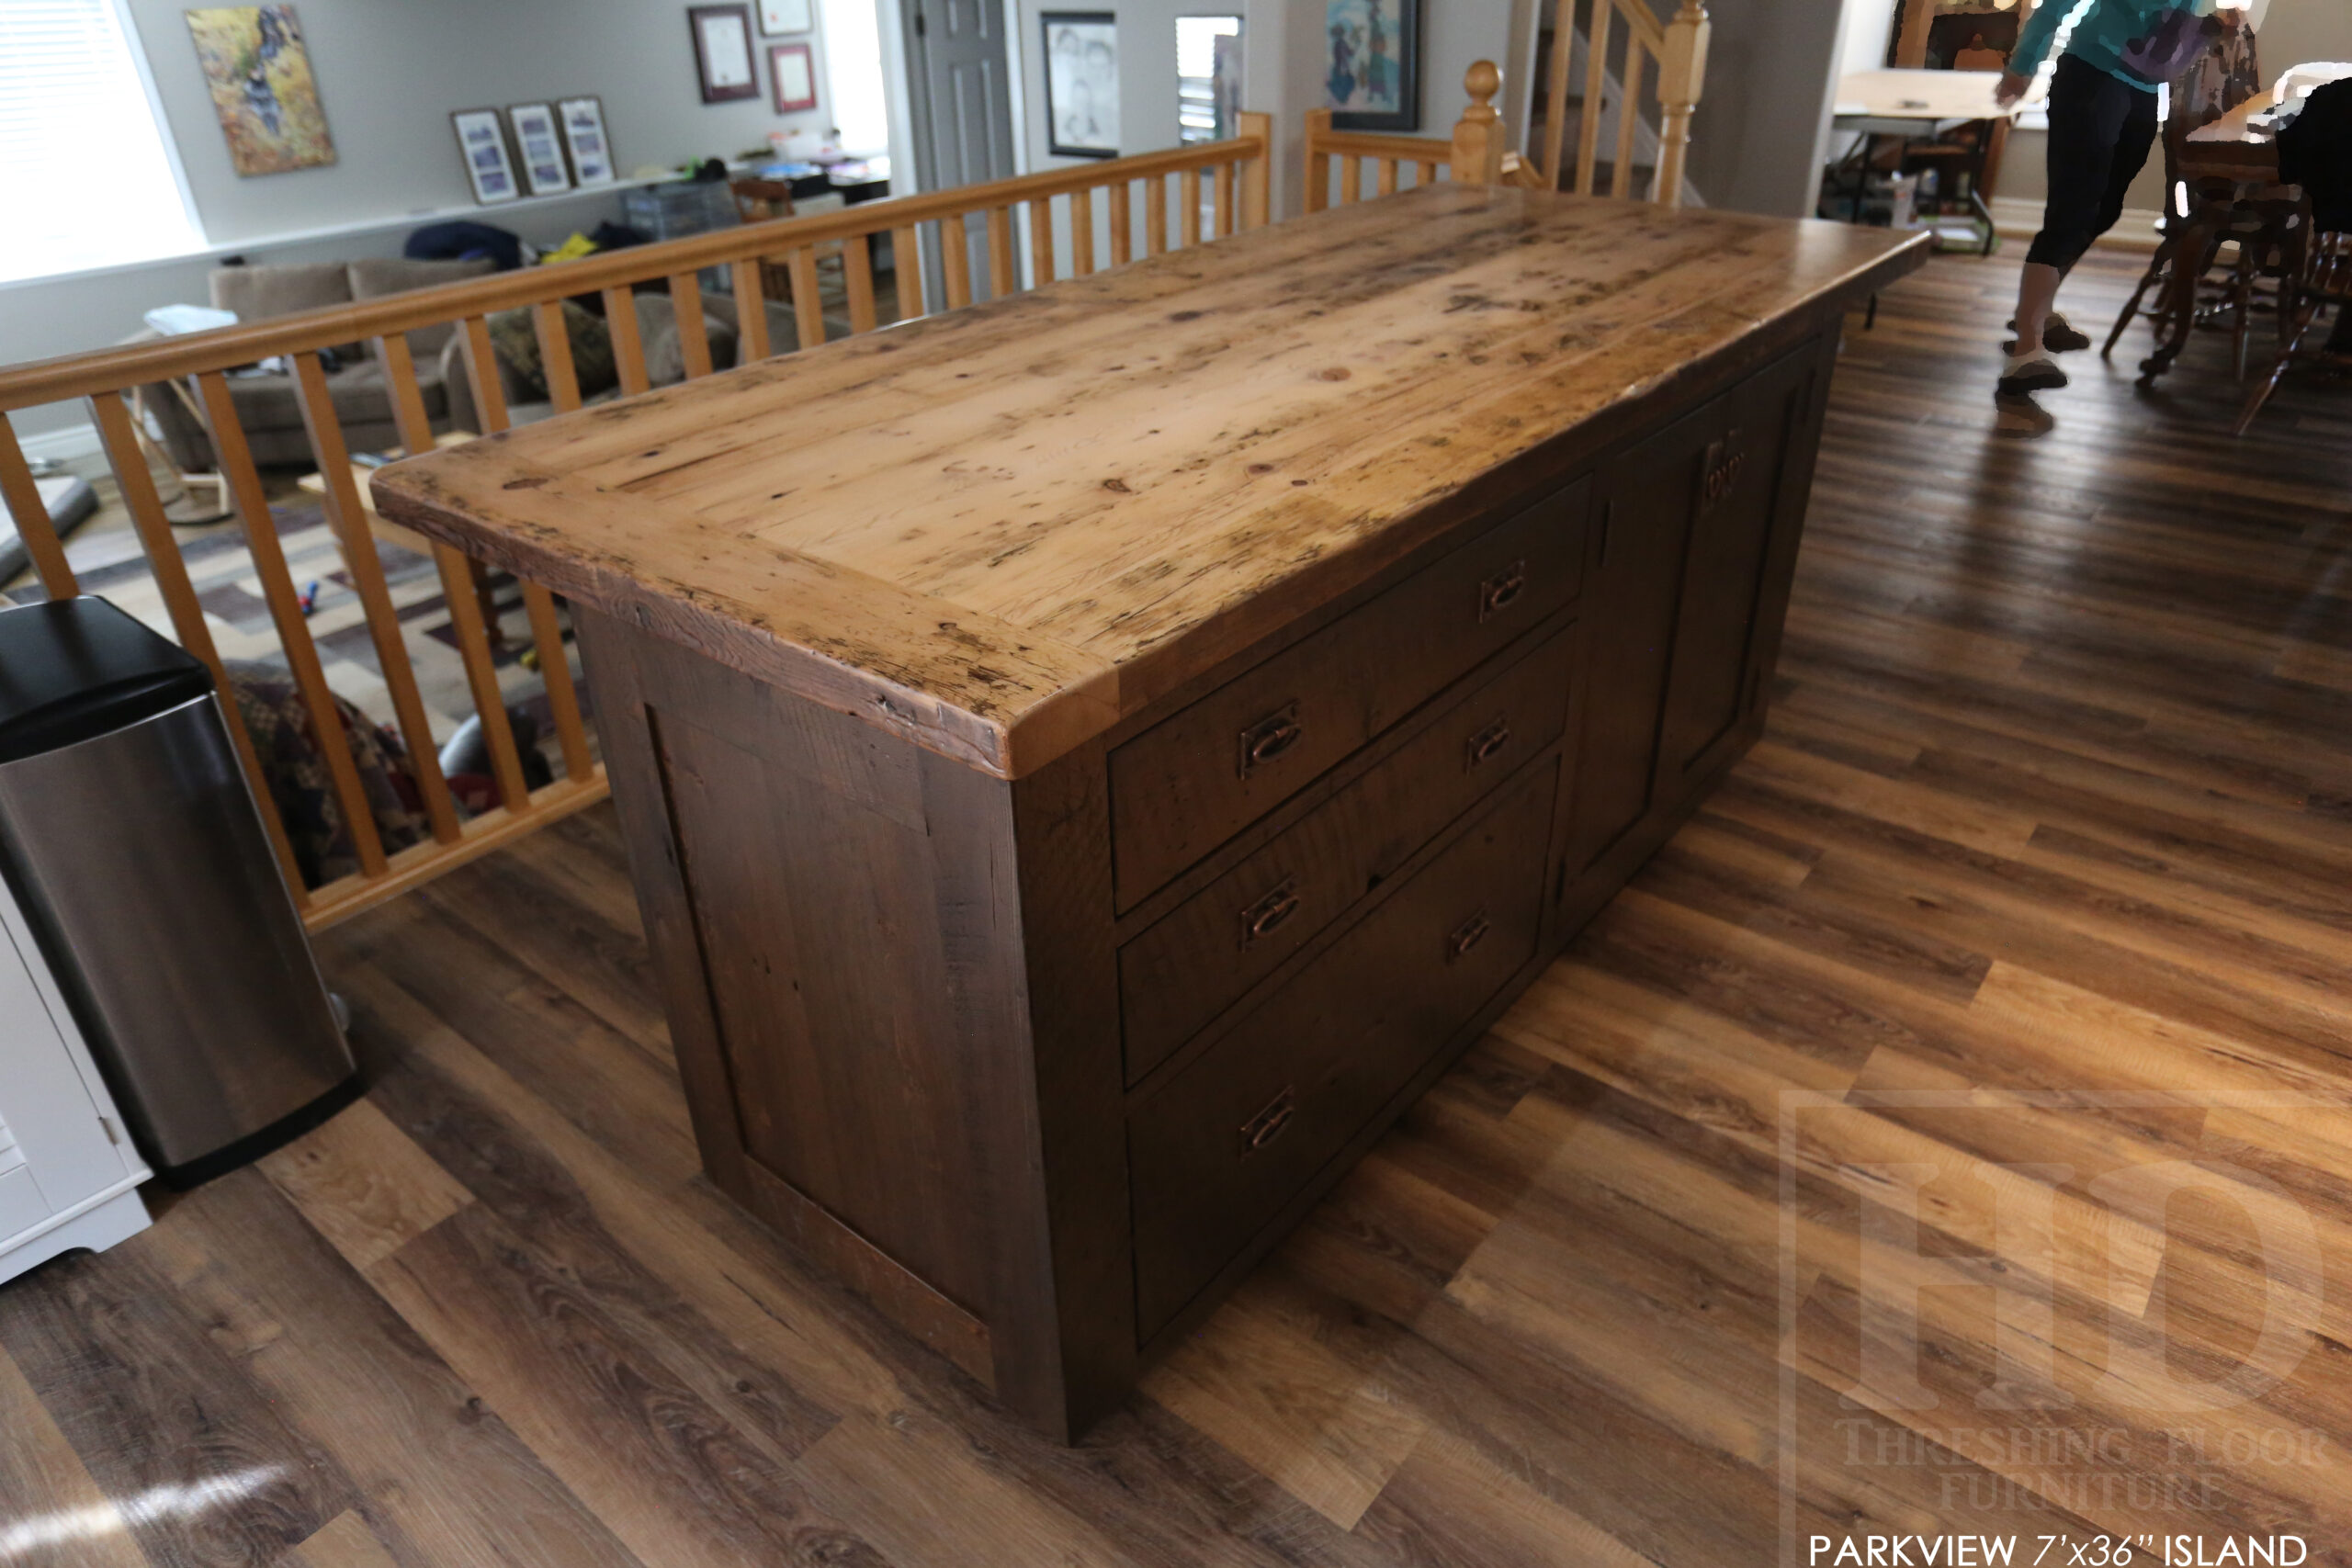 7’ Ontario Barnwood Island we made for a Wellesley, Ontario Home – 36” wide – 36” [Counter] height – 3 Drawers / 2 Doors - Old Growth Reclaimed Hemlock Threshing Floor Construction – Original edges & distressing maintained - Mission Cast Brass Lee Valley Hardware – Greytone Option Top / Black Stain Option Base - Premium epoxy + matte polyurethane finish - www.table.ca